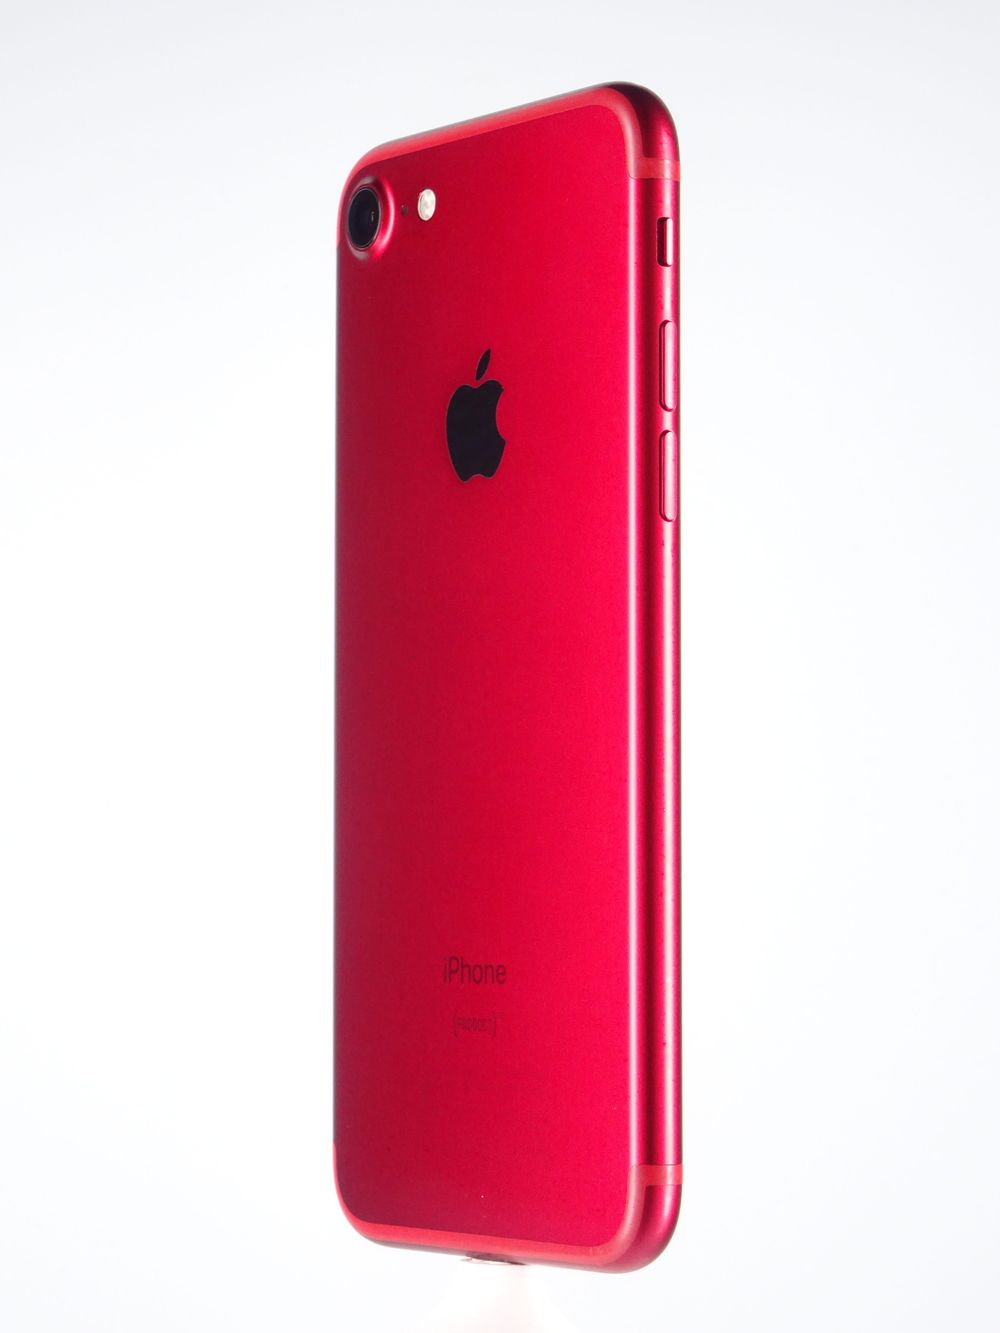 Telefon mobil Apple iPhone 7, Red, 128 GB,  Excelent